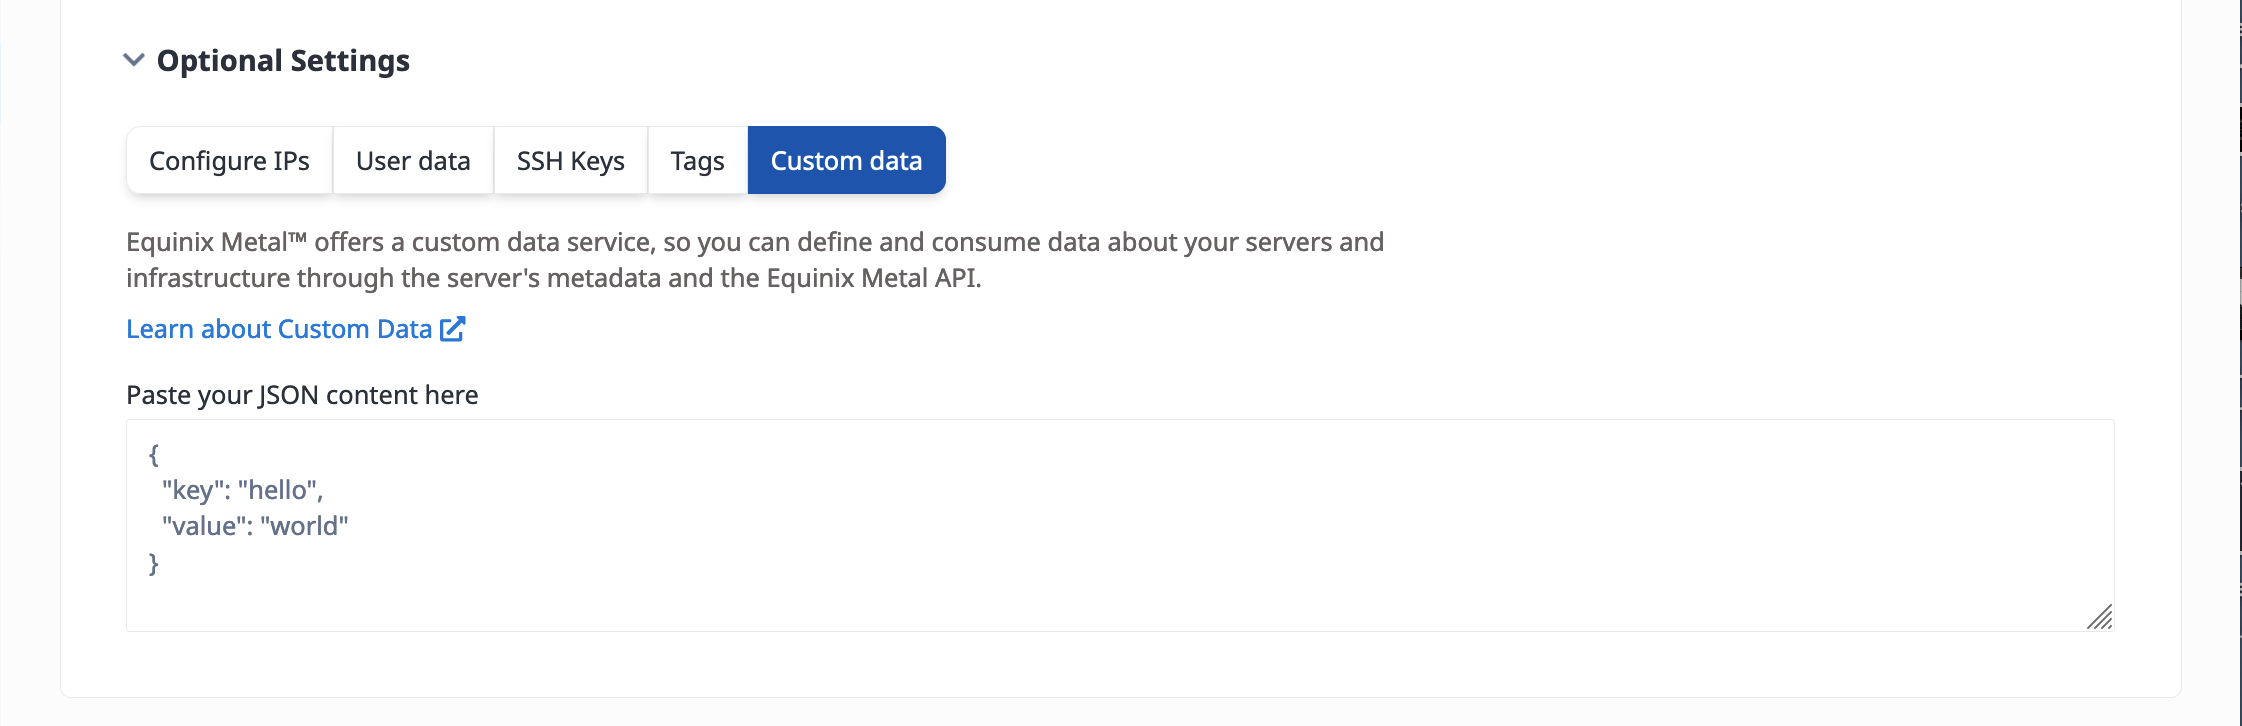 Custom Data Field in the Optional Settings in the Console